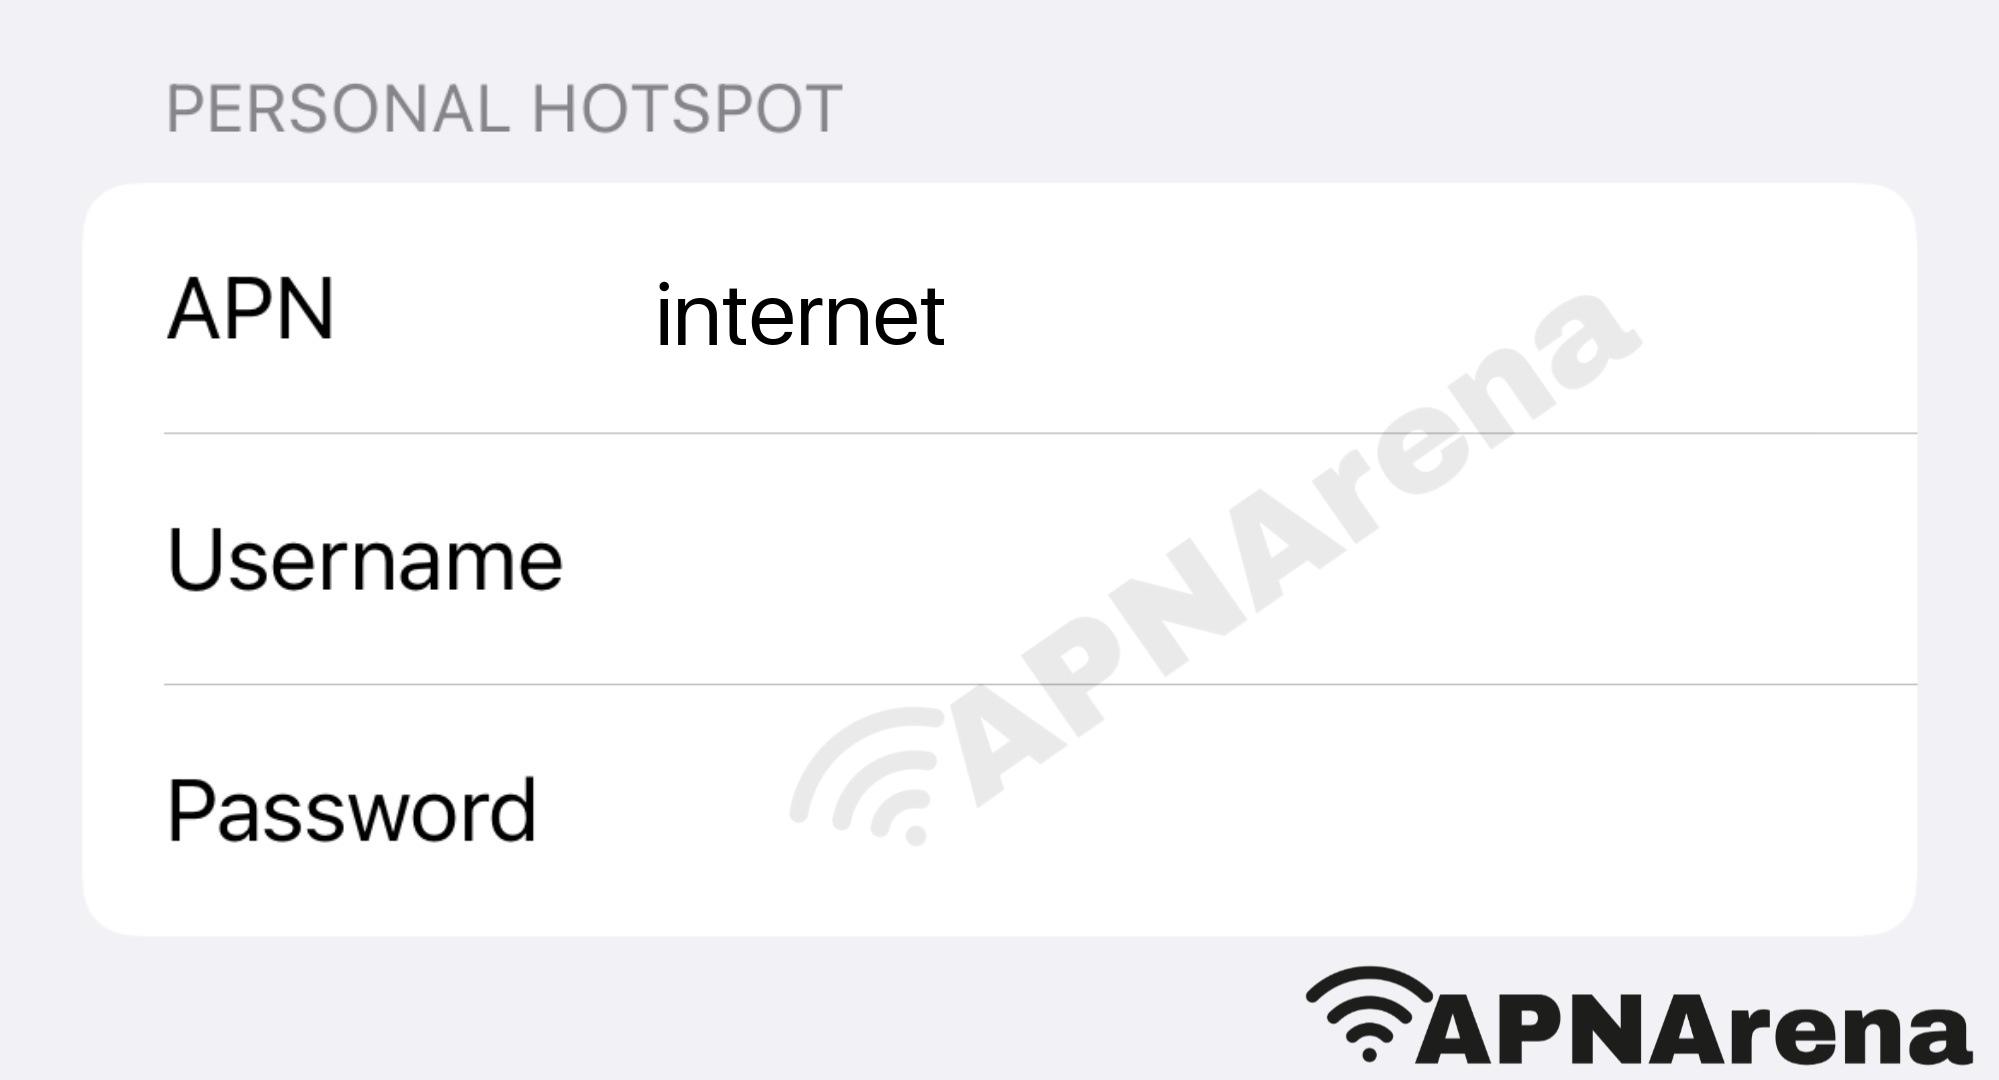 Lycamobile Ireland Personal Hotspot Settings for iPhone